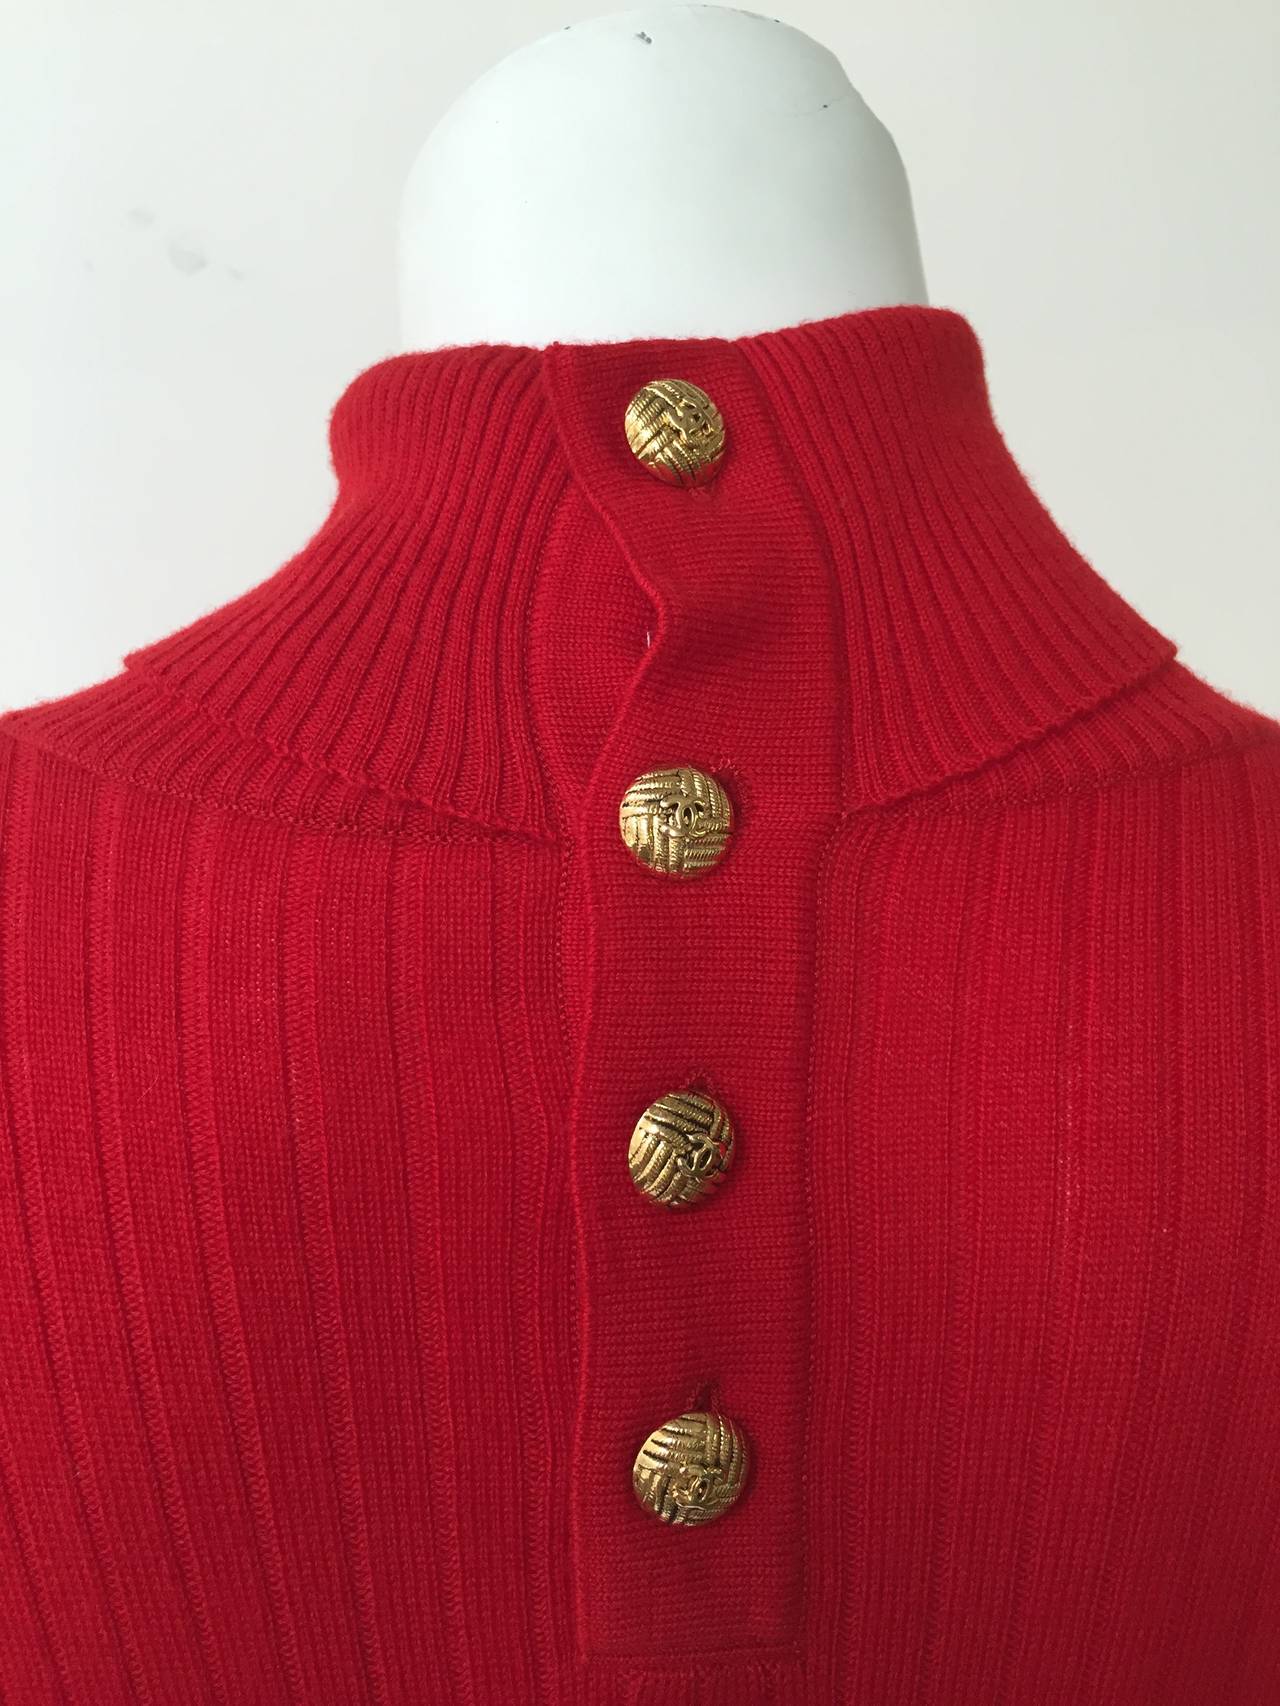 Chanel 80s Red Wool Knit Sweater Size 6. 3